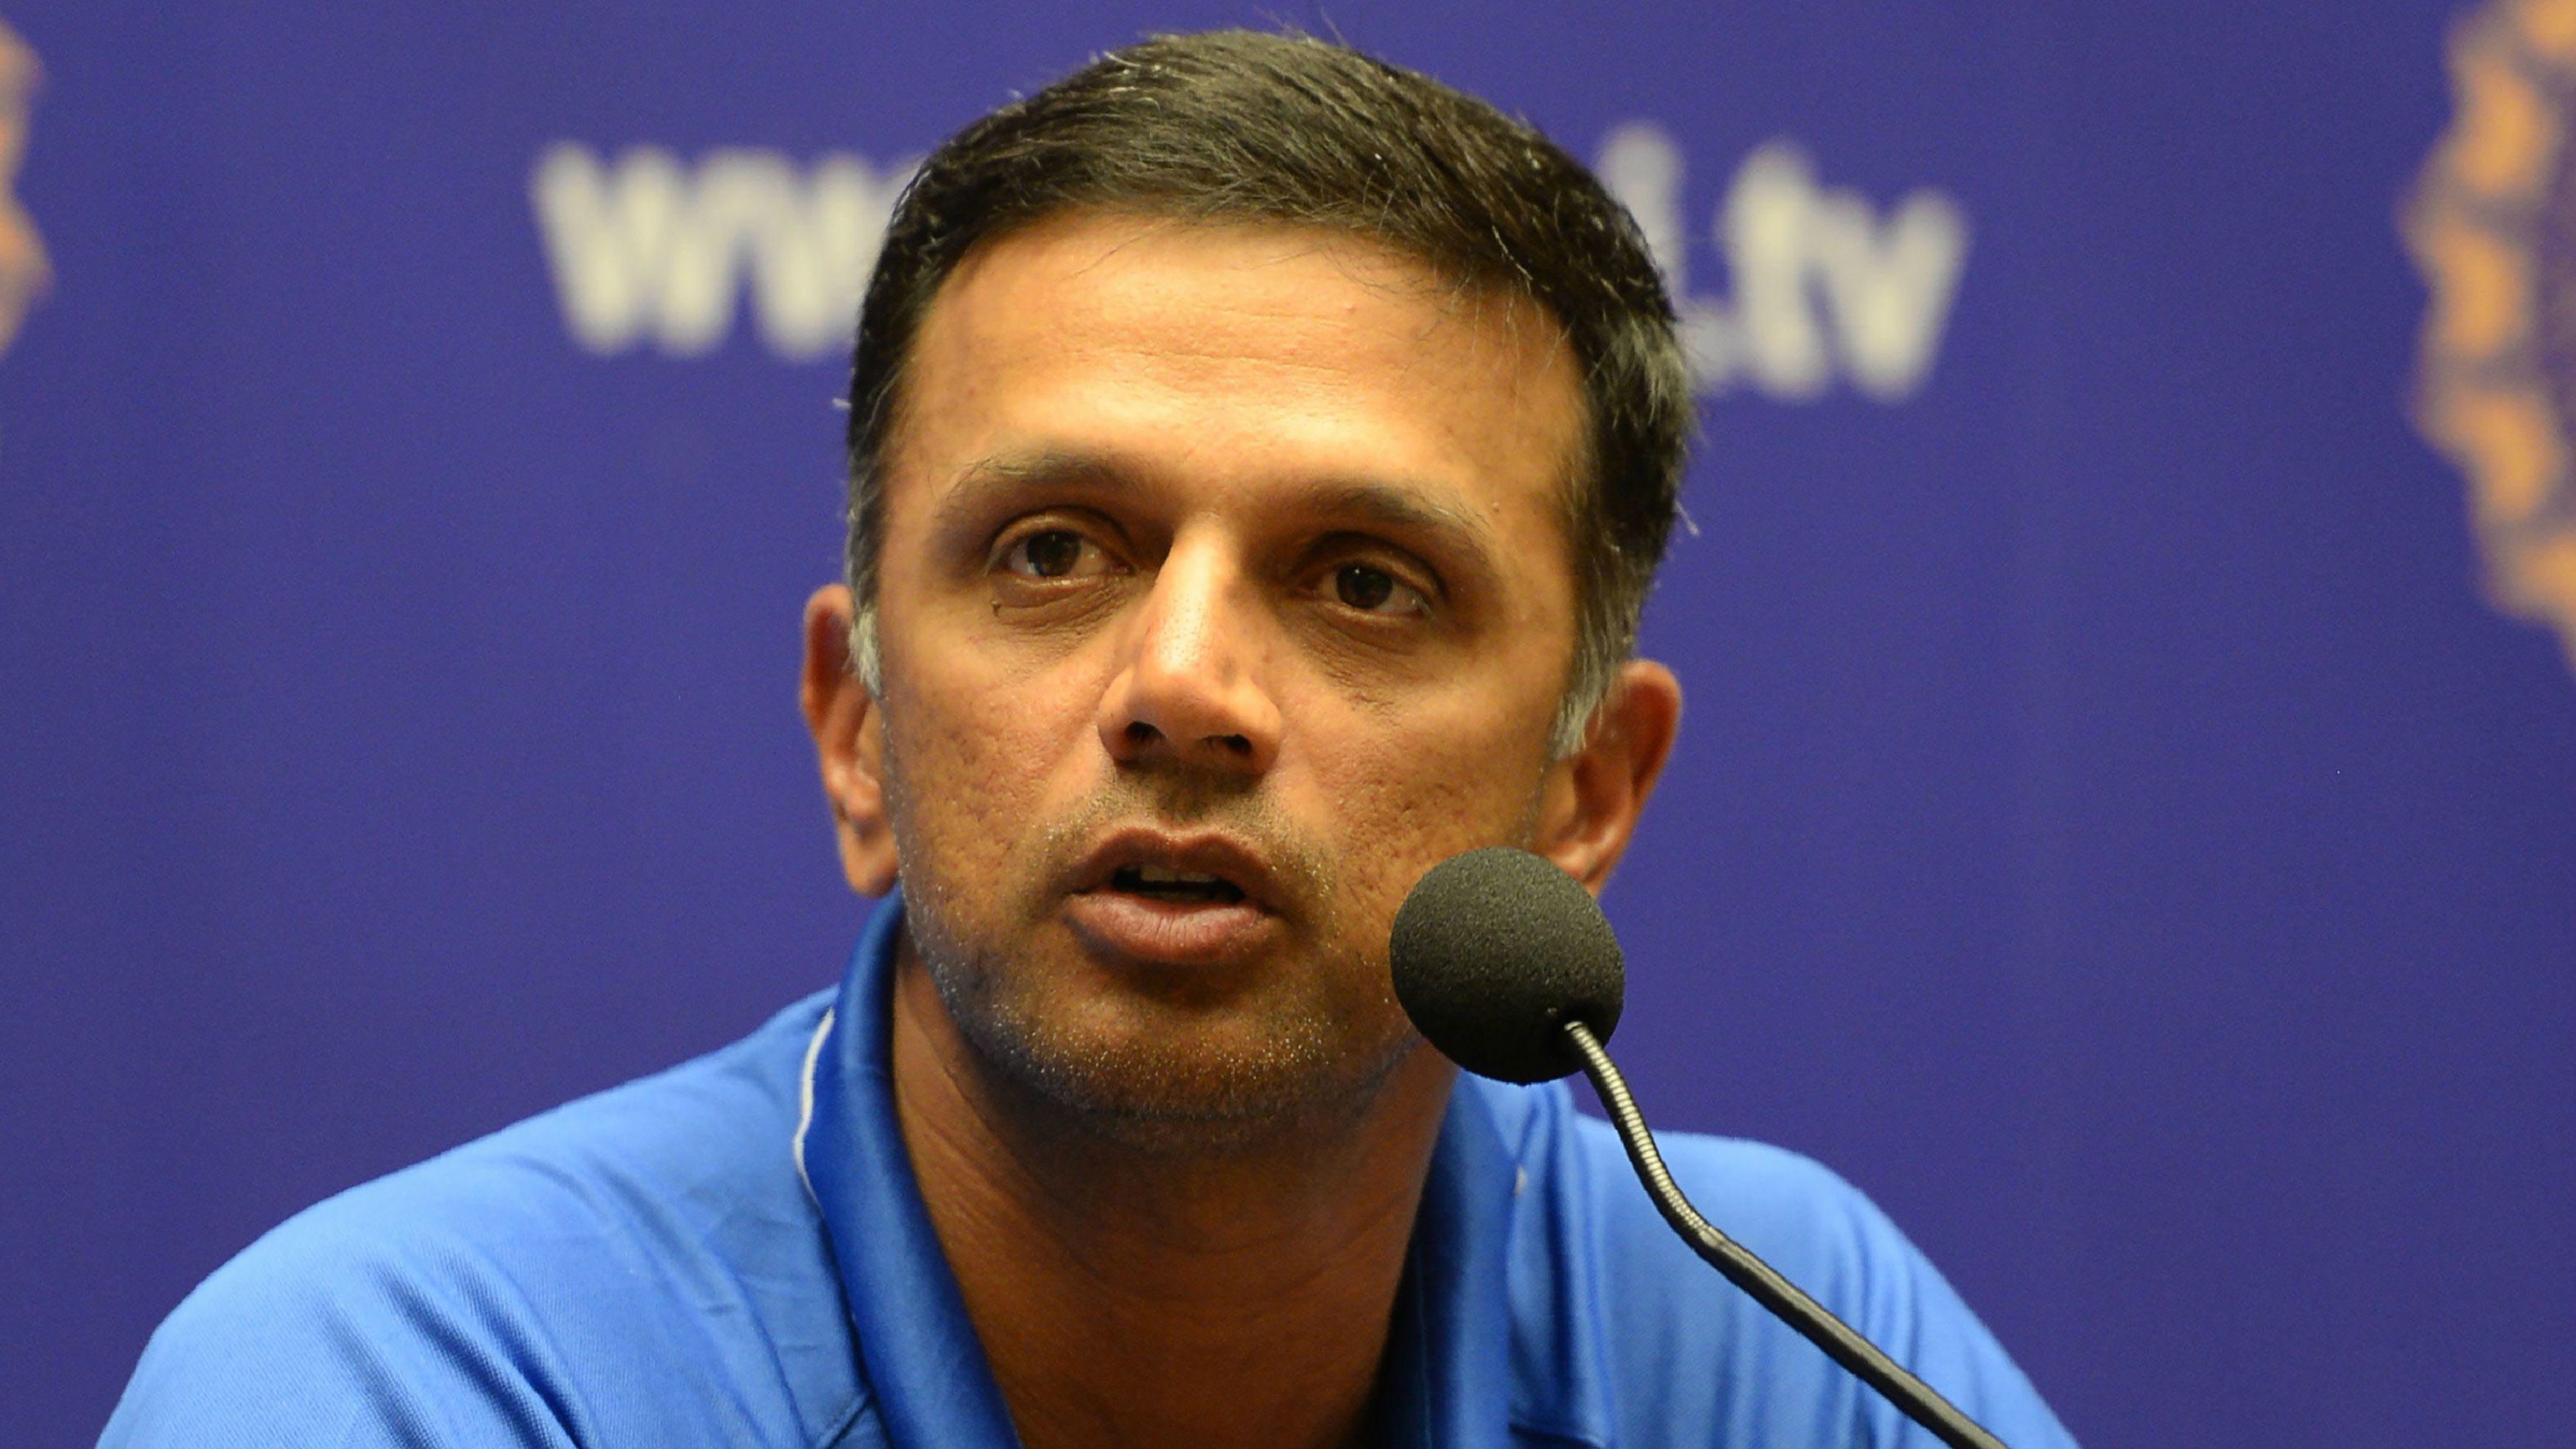 WATCH: When Rahul Dravid turned coy remembering his days as a teenager3151 x 1772